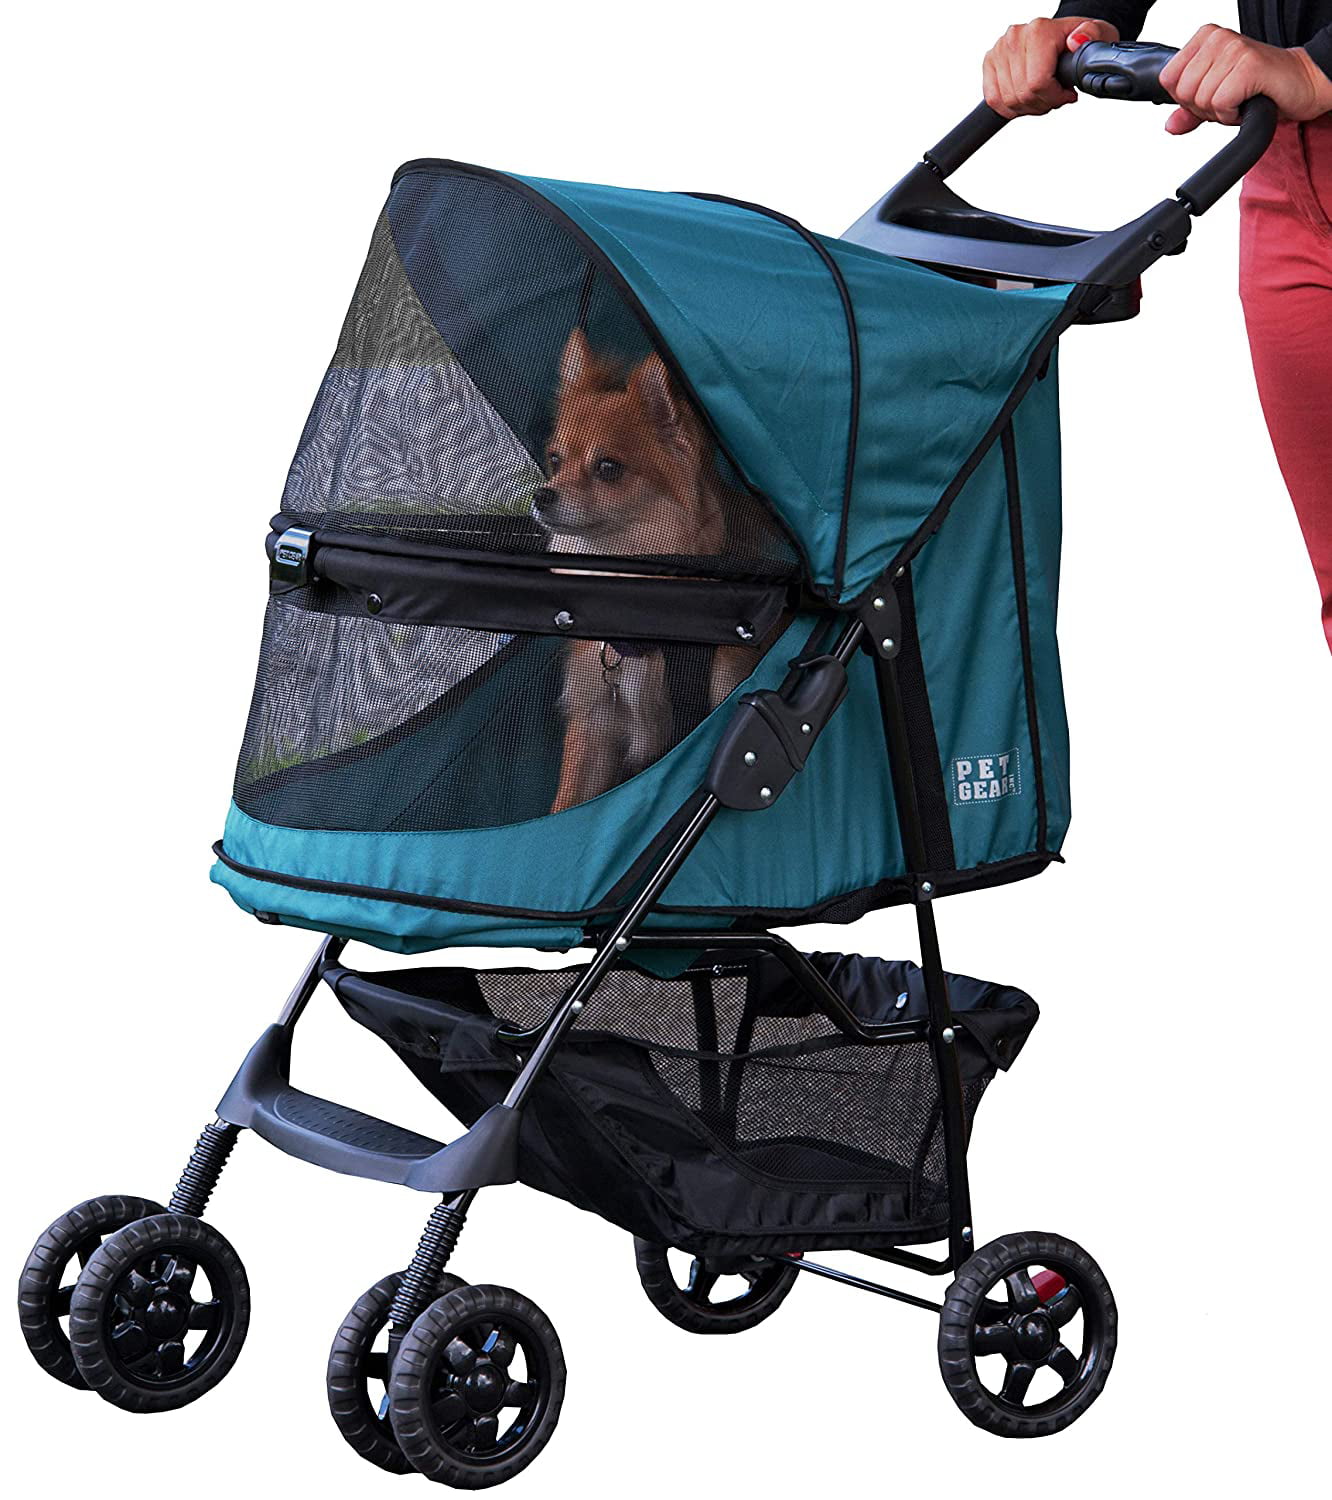 Pet Gear No-Zip Special Edition 3 Wheel Pet Stroller for Cats/Dogs Easy One-Hand Fold Removable Liner Zipperless Entry 